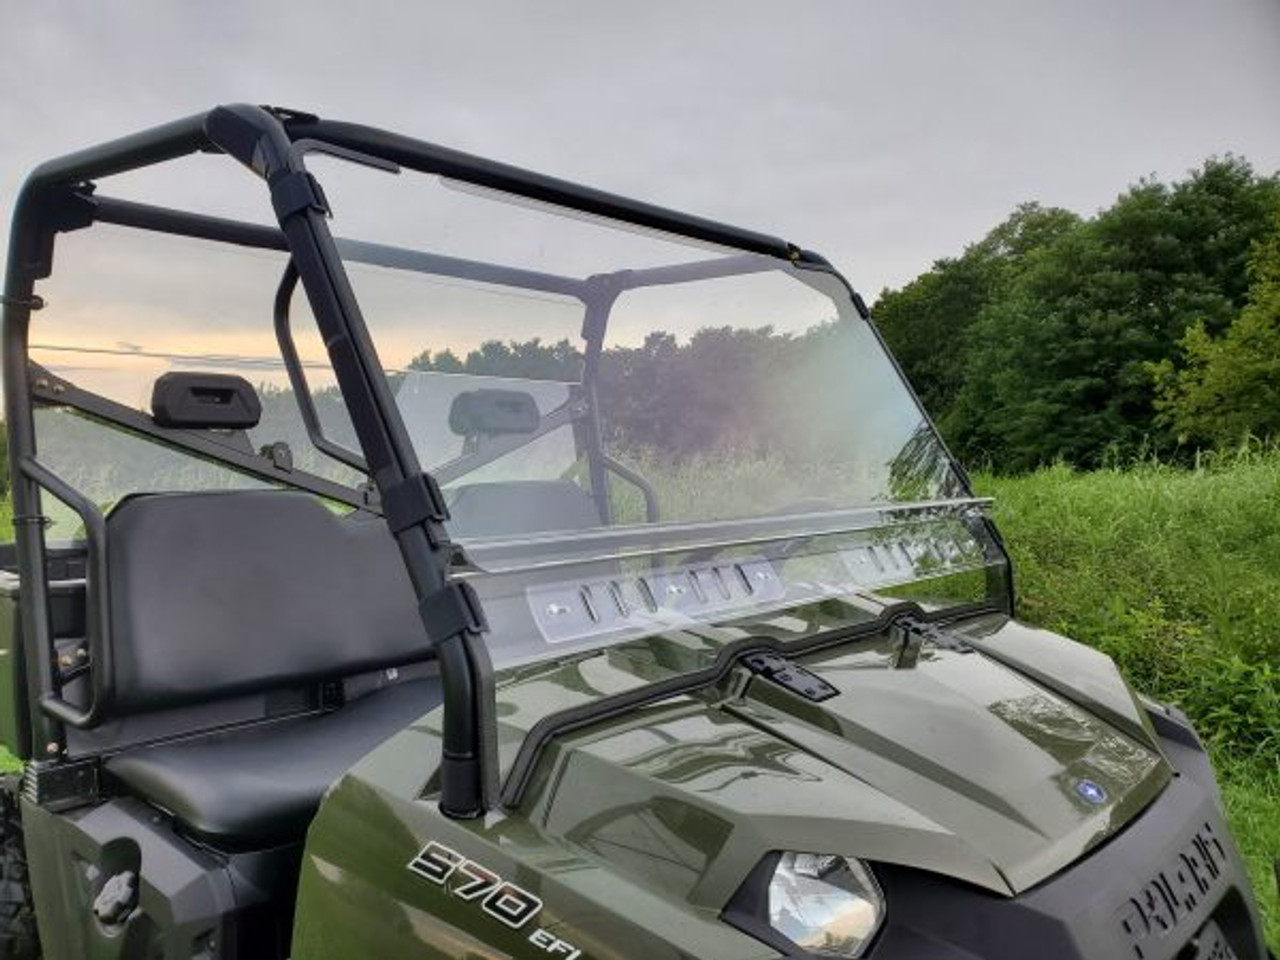 3 Star side x side Polaris Ranger Crew 570-6/800 windshield side angle view